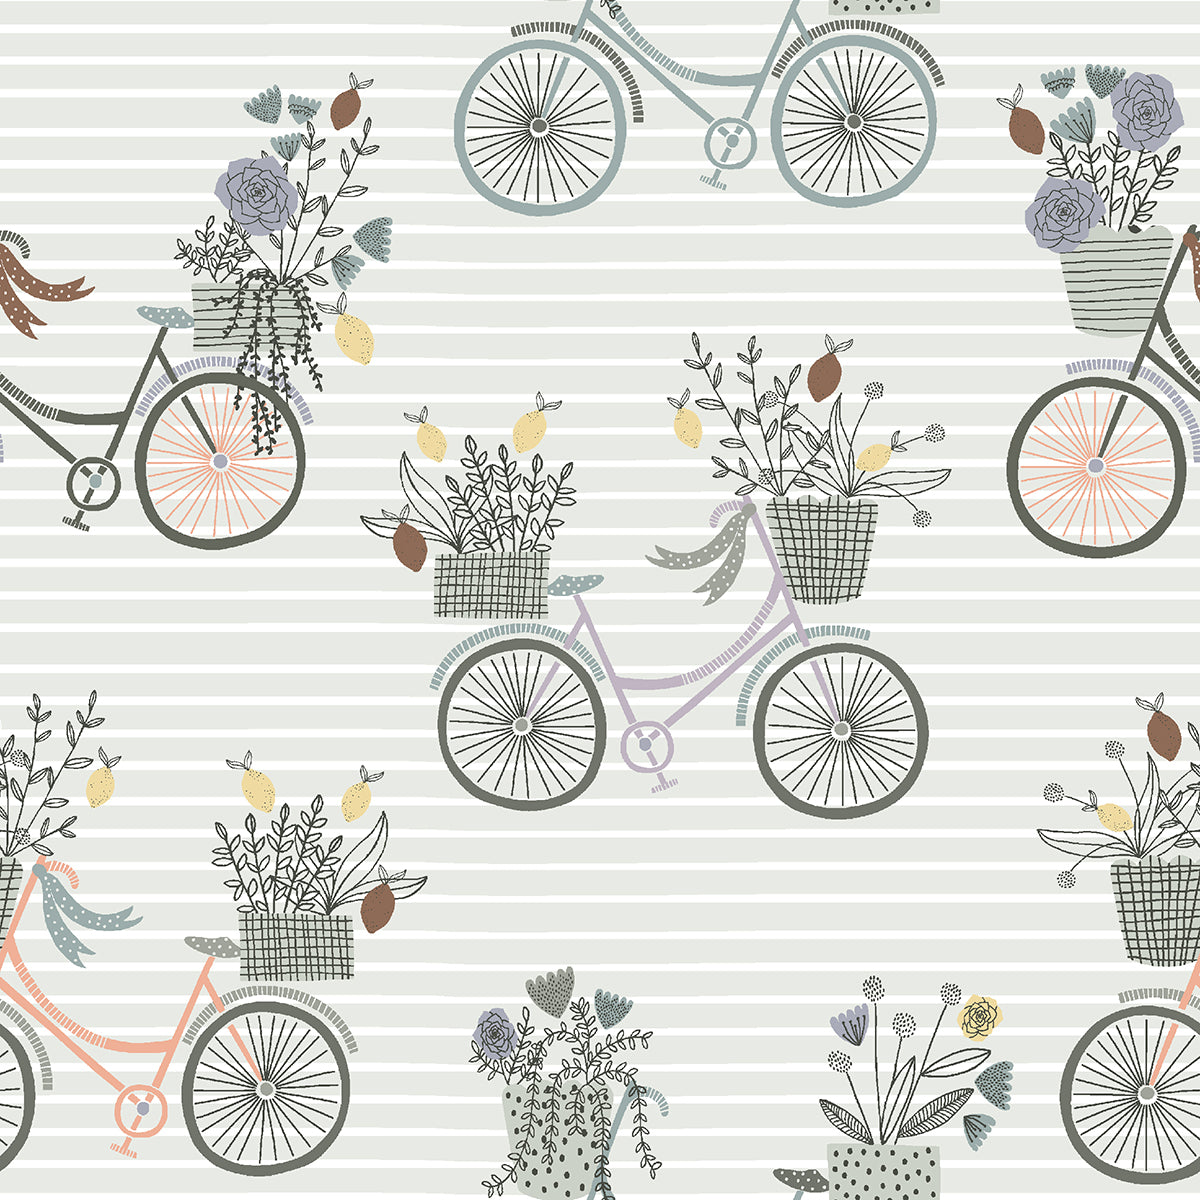 Summer in the Cotswolds - Evening Ride Fern Fabric